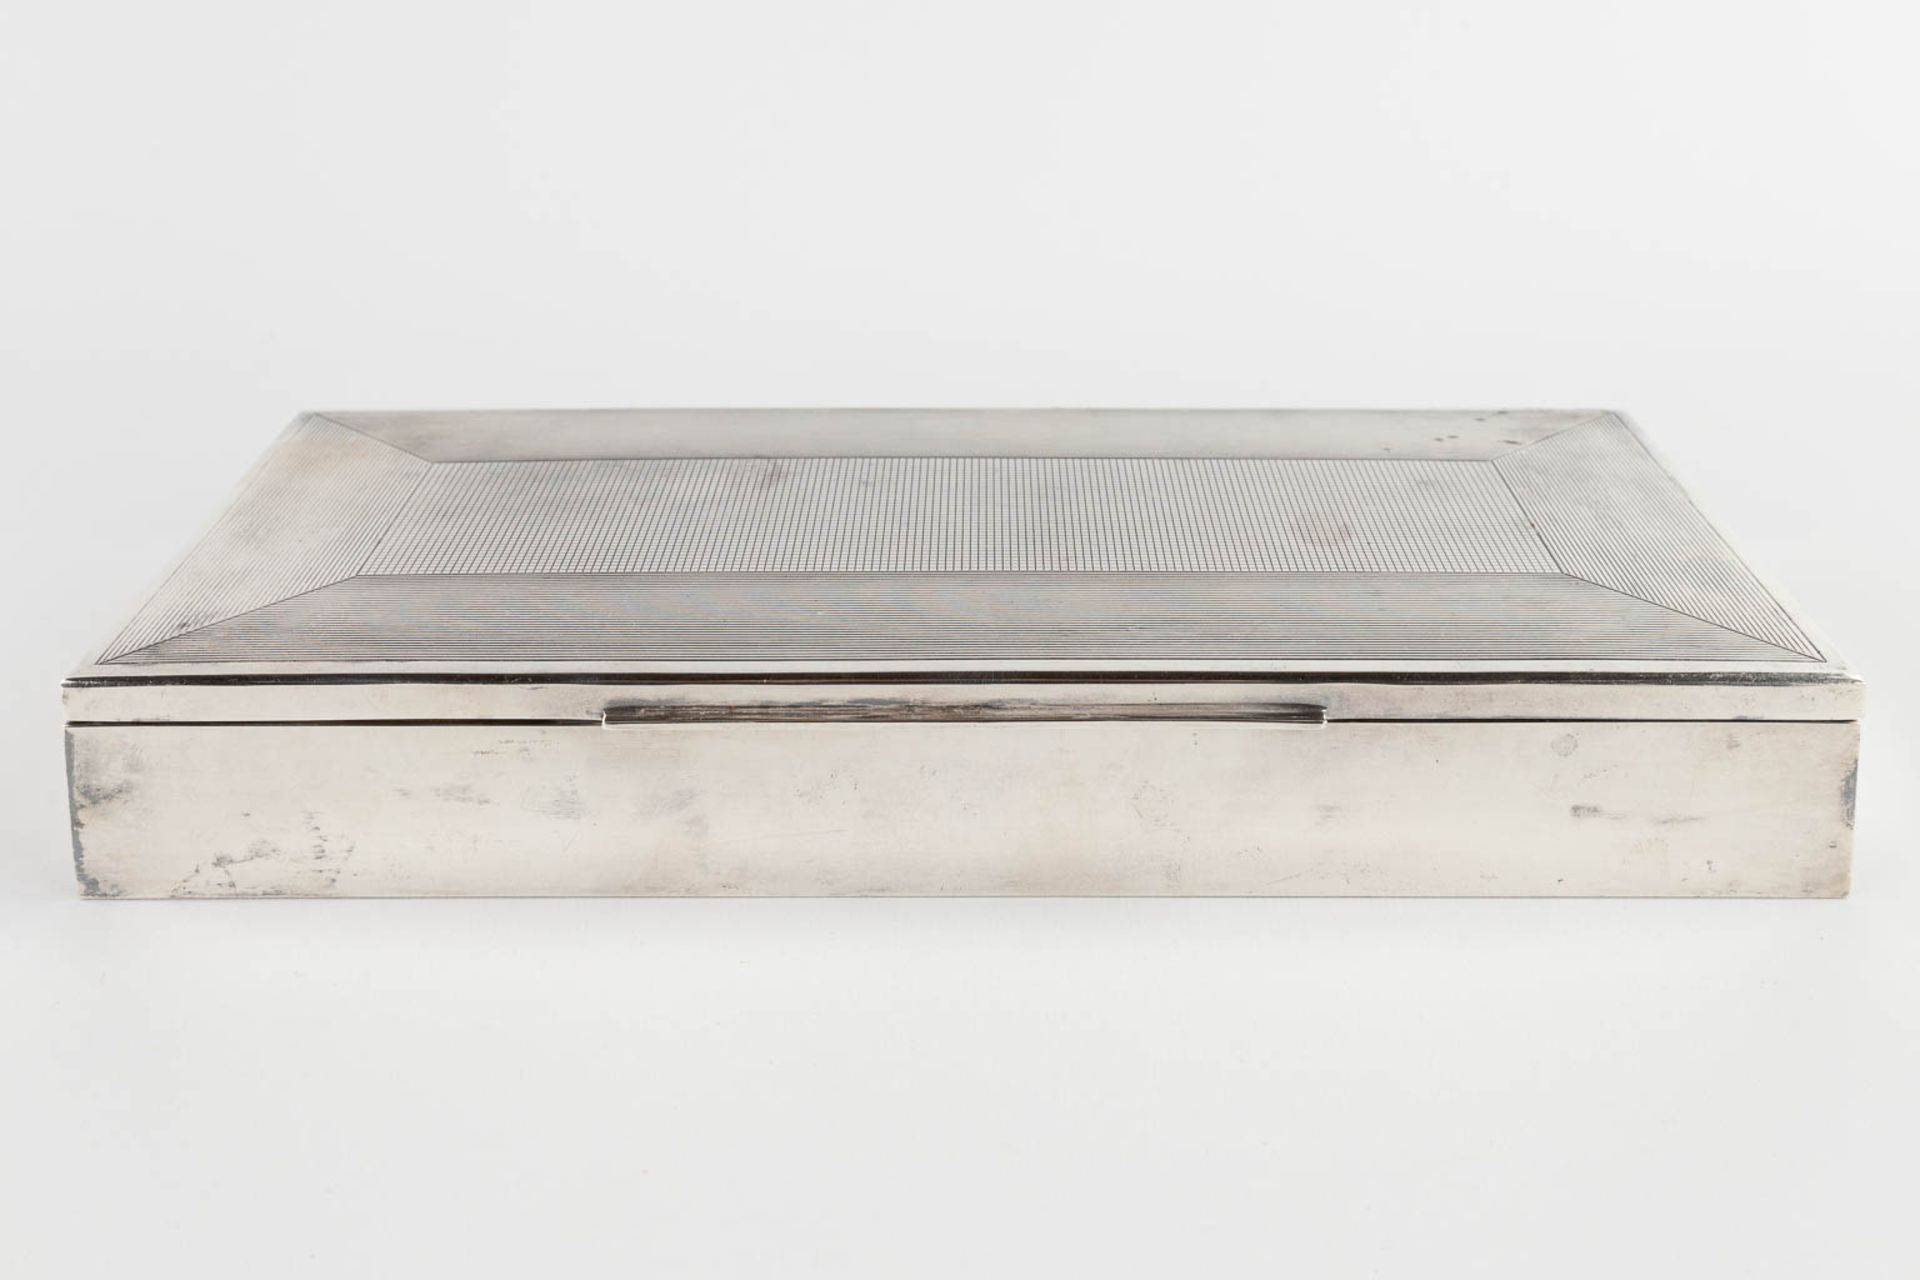 A storage box, silver and wood, Budapest, 835. 20th C. 970g. (D:14 x W:30 x H:4,5 cm) - Image 3 of 12